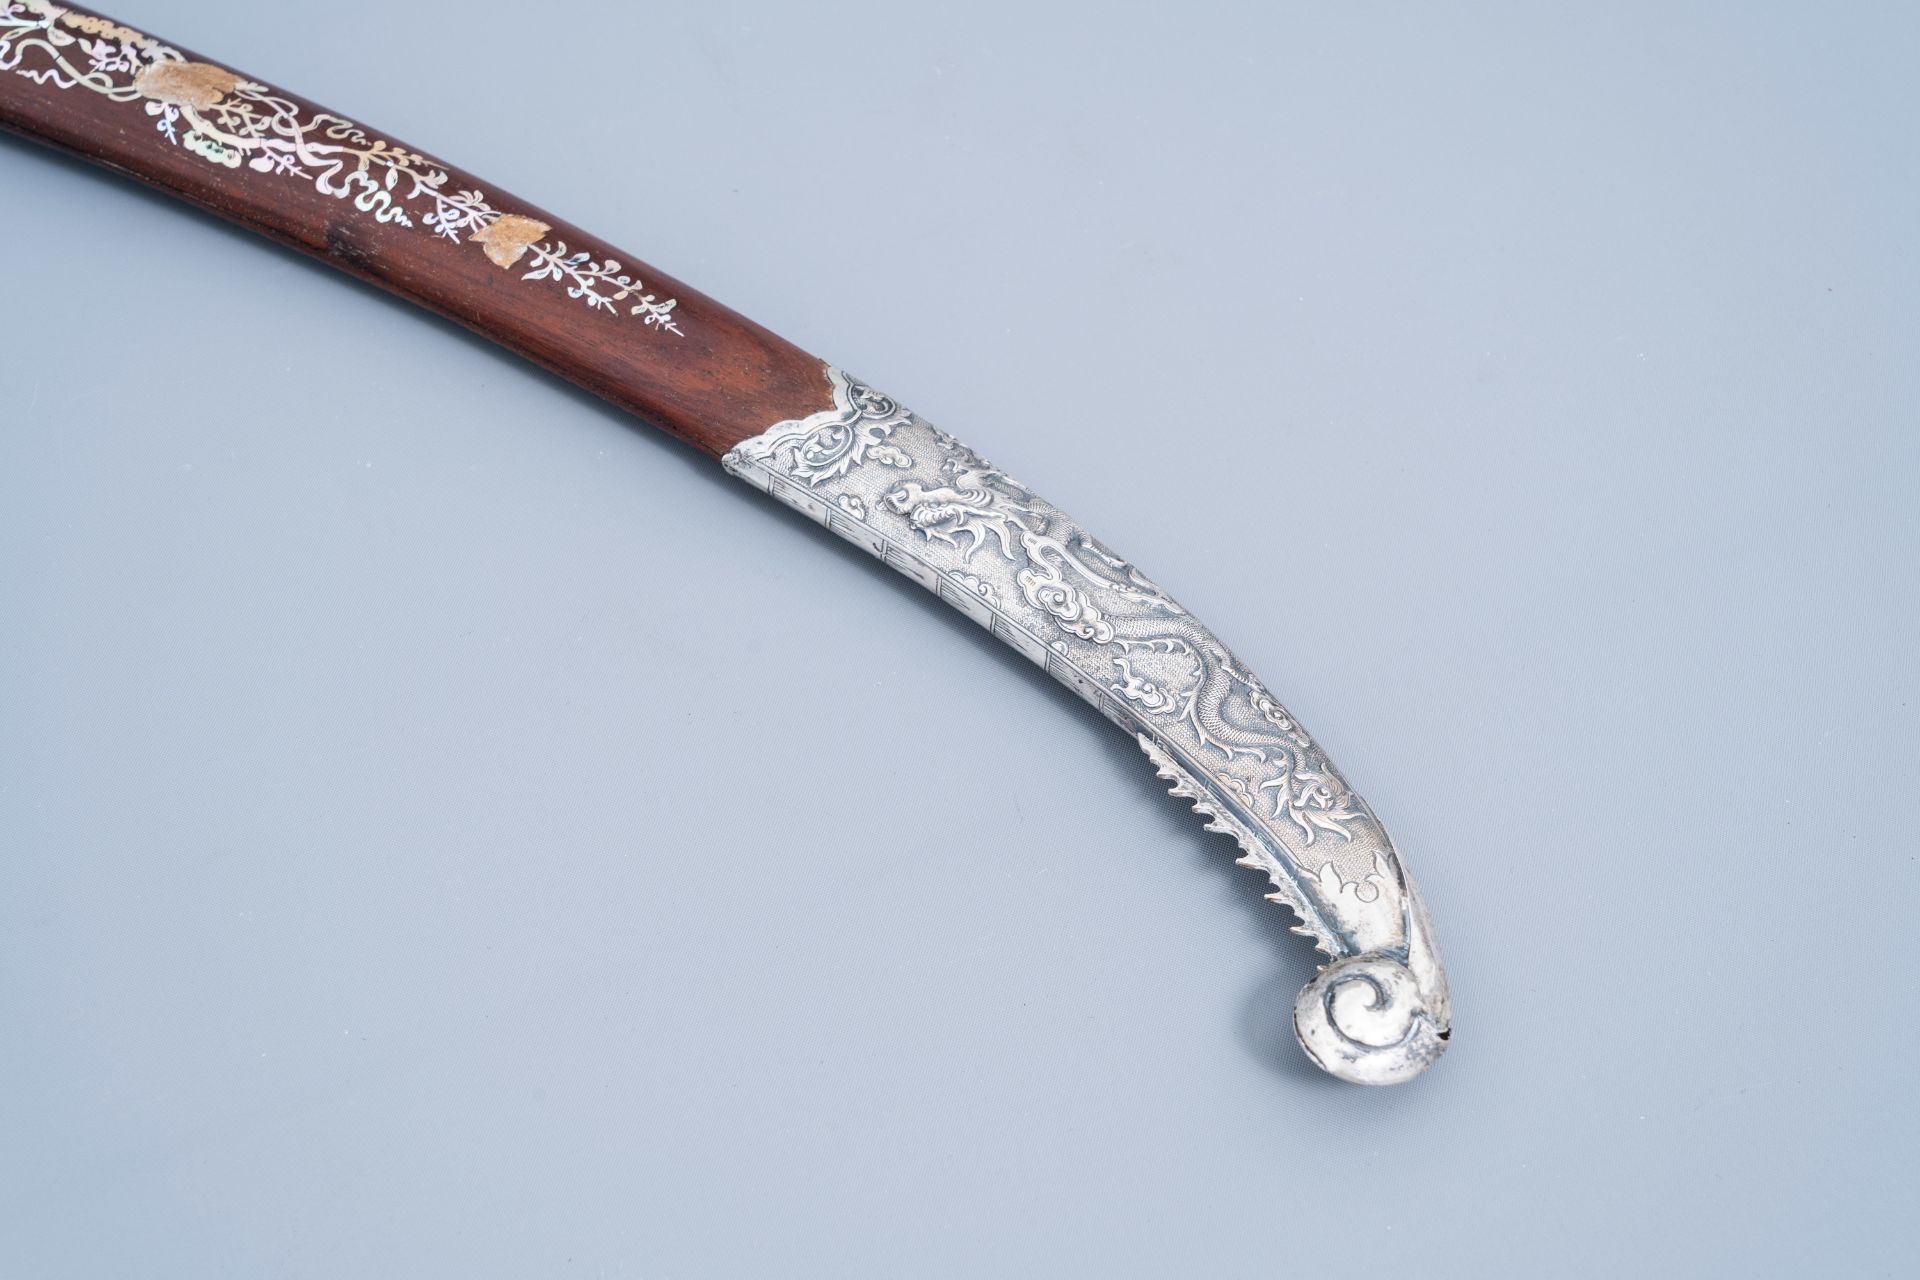 AÊ ceremonial Vietnamese 'guom' sword with silver and mother-of-pearl inlaid wooden scabbard with dr - Image 5 of 13